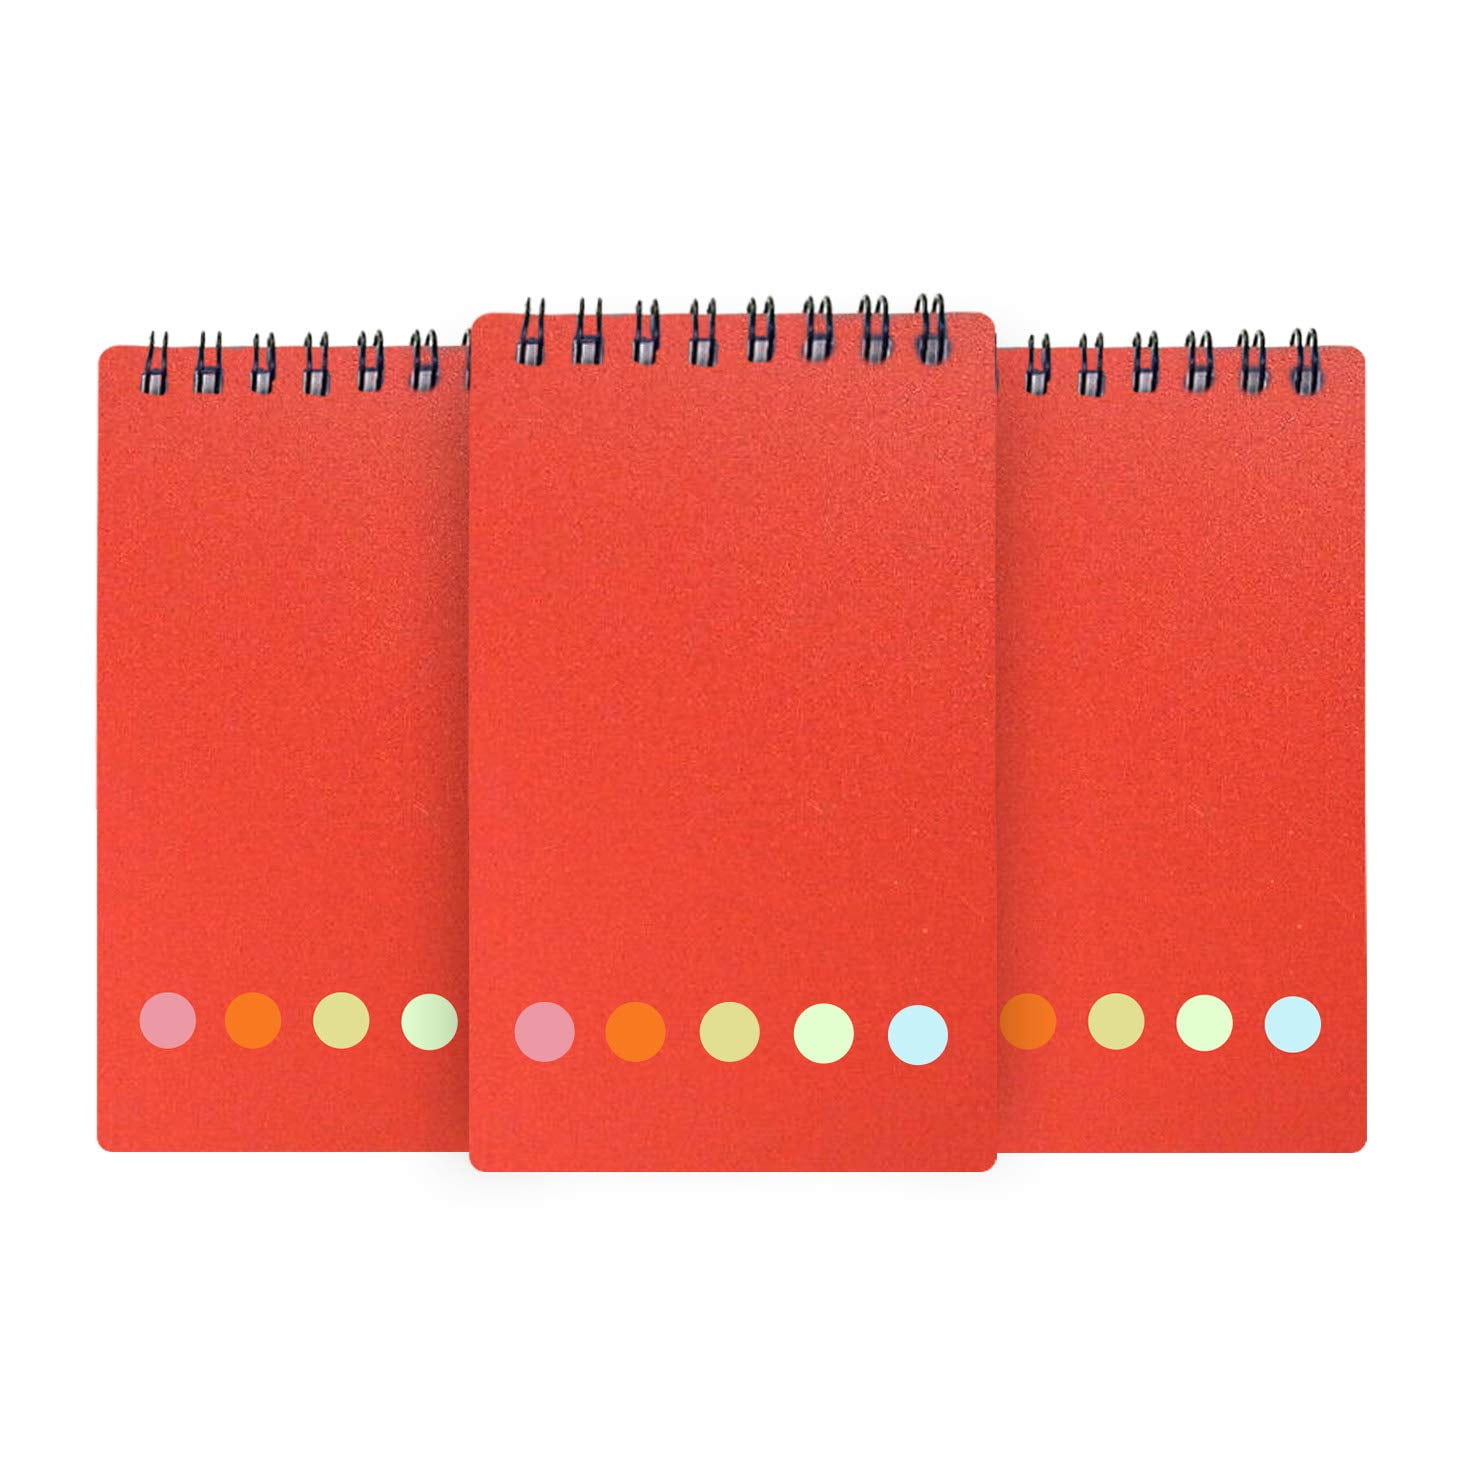 MINI NOTE BOOK SPIRAL BOUND WRITING NOTEPAD SMALL PAD GIFTS RADOM F1C9 A8P6